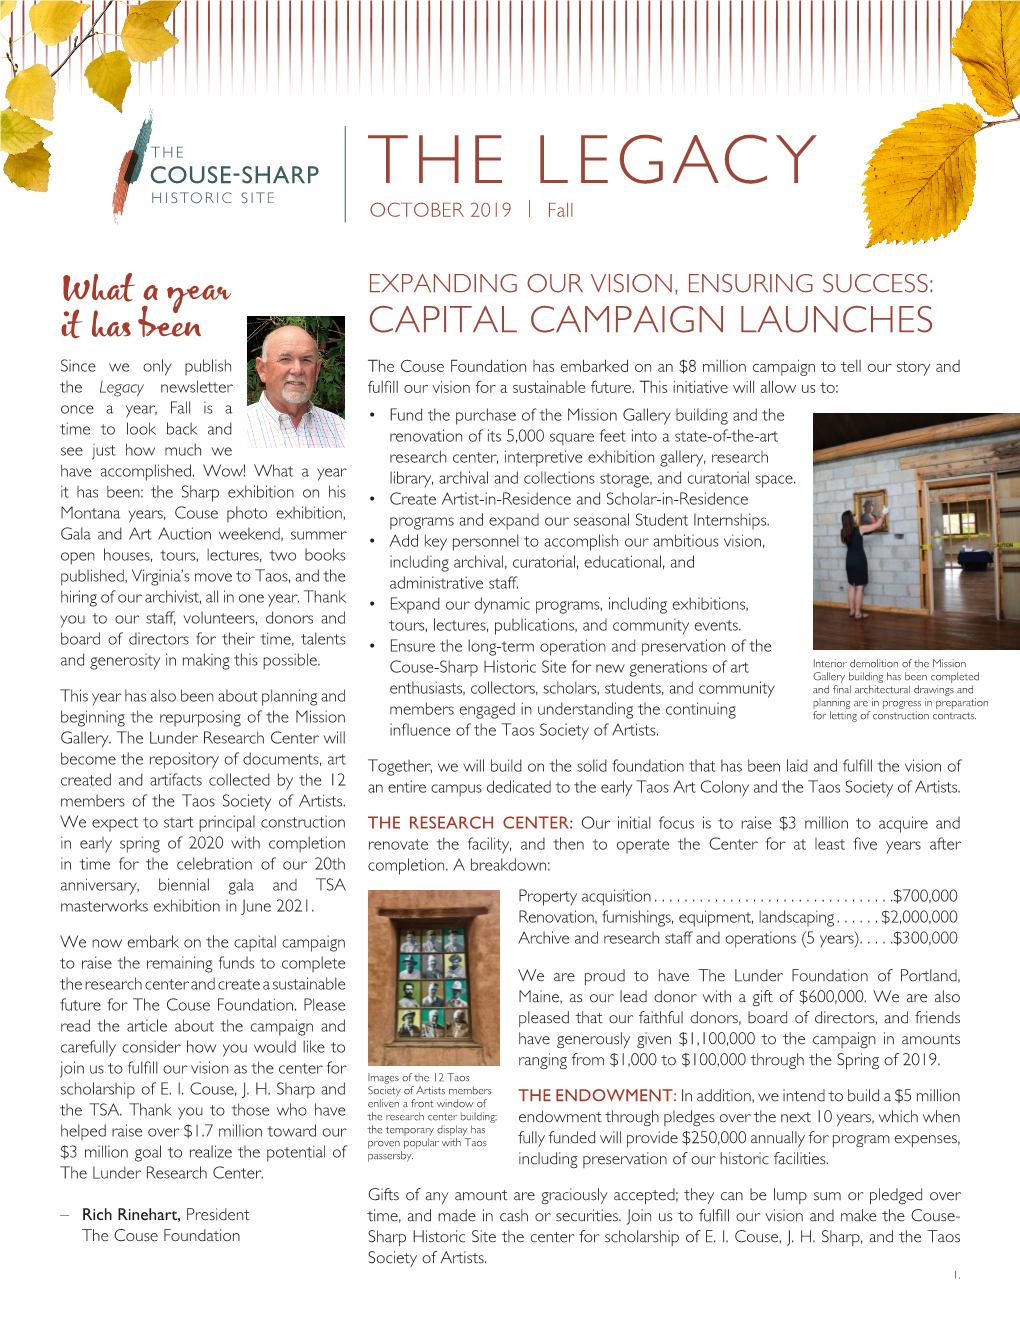 THE LEGACY OCTOBER 2019 | Fall